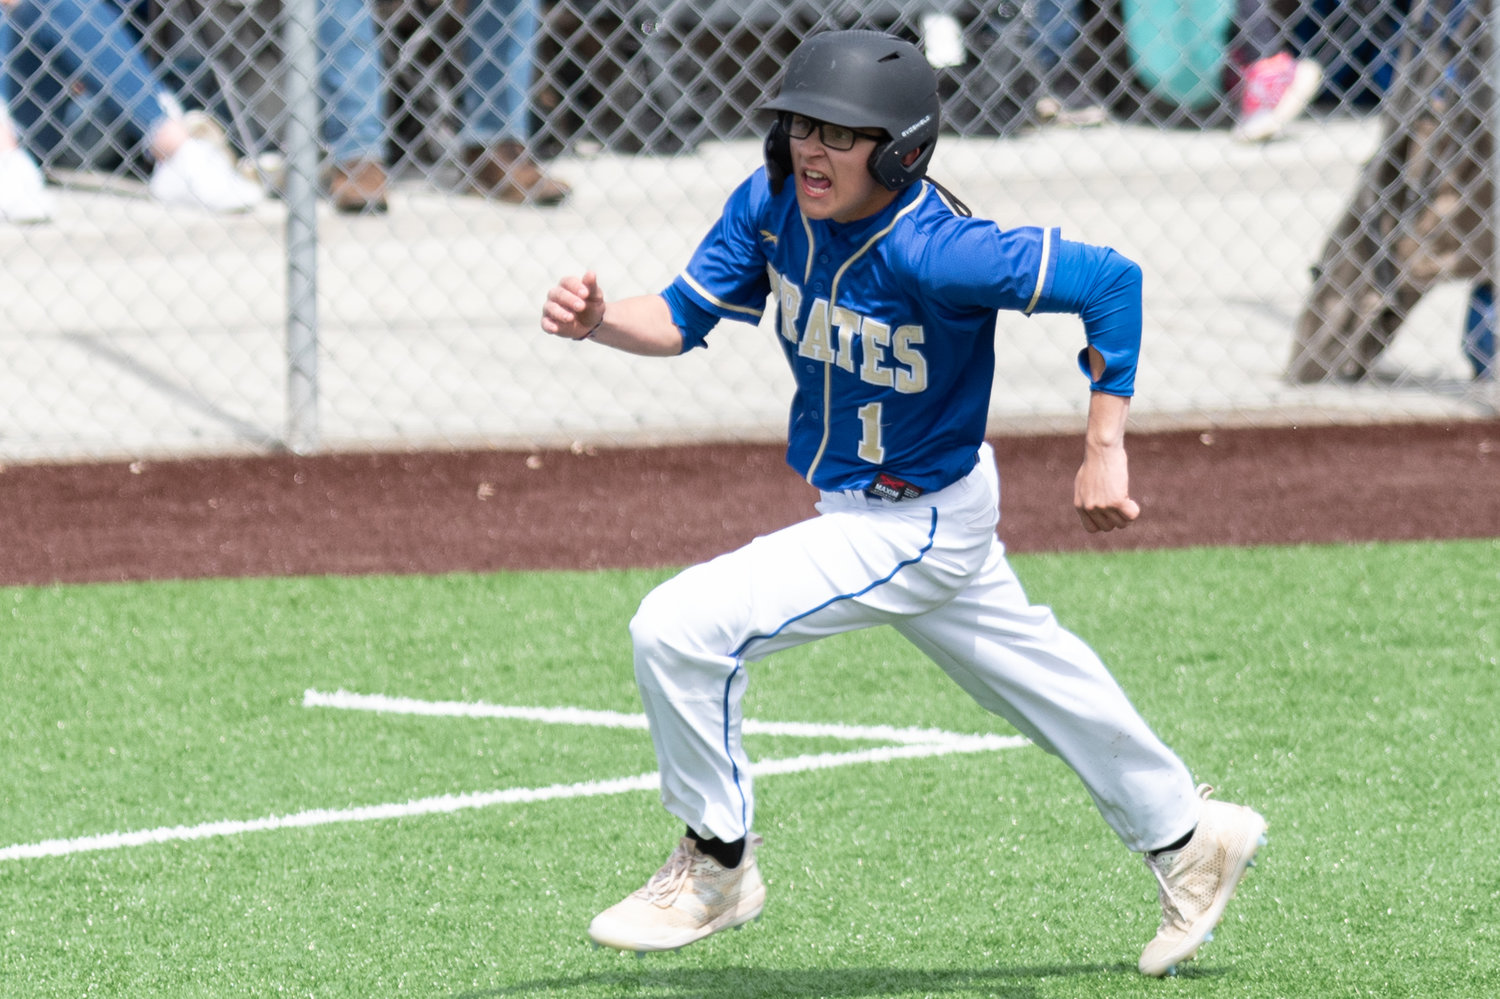 Adna's Tristan Percival sprints home to beat a throw against Forks in the District 4 quarterfinals at Shelton High School May 7.